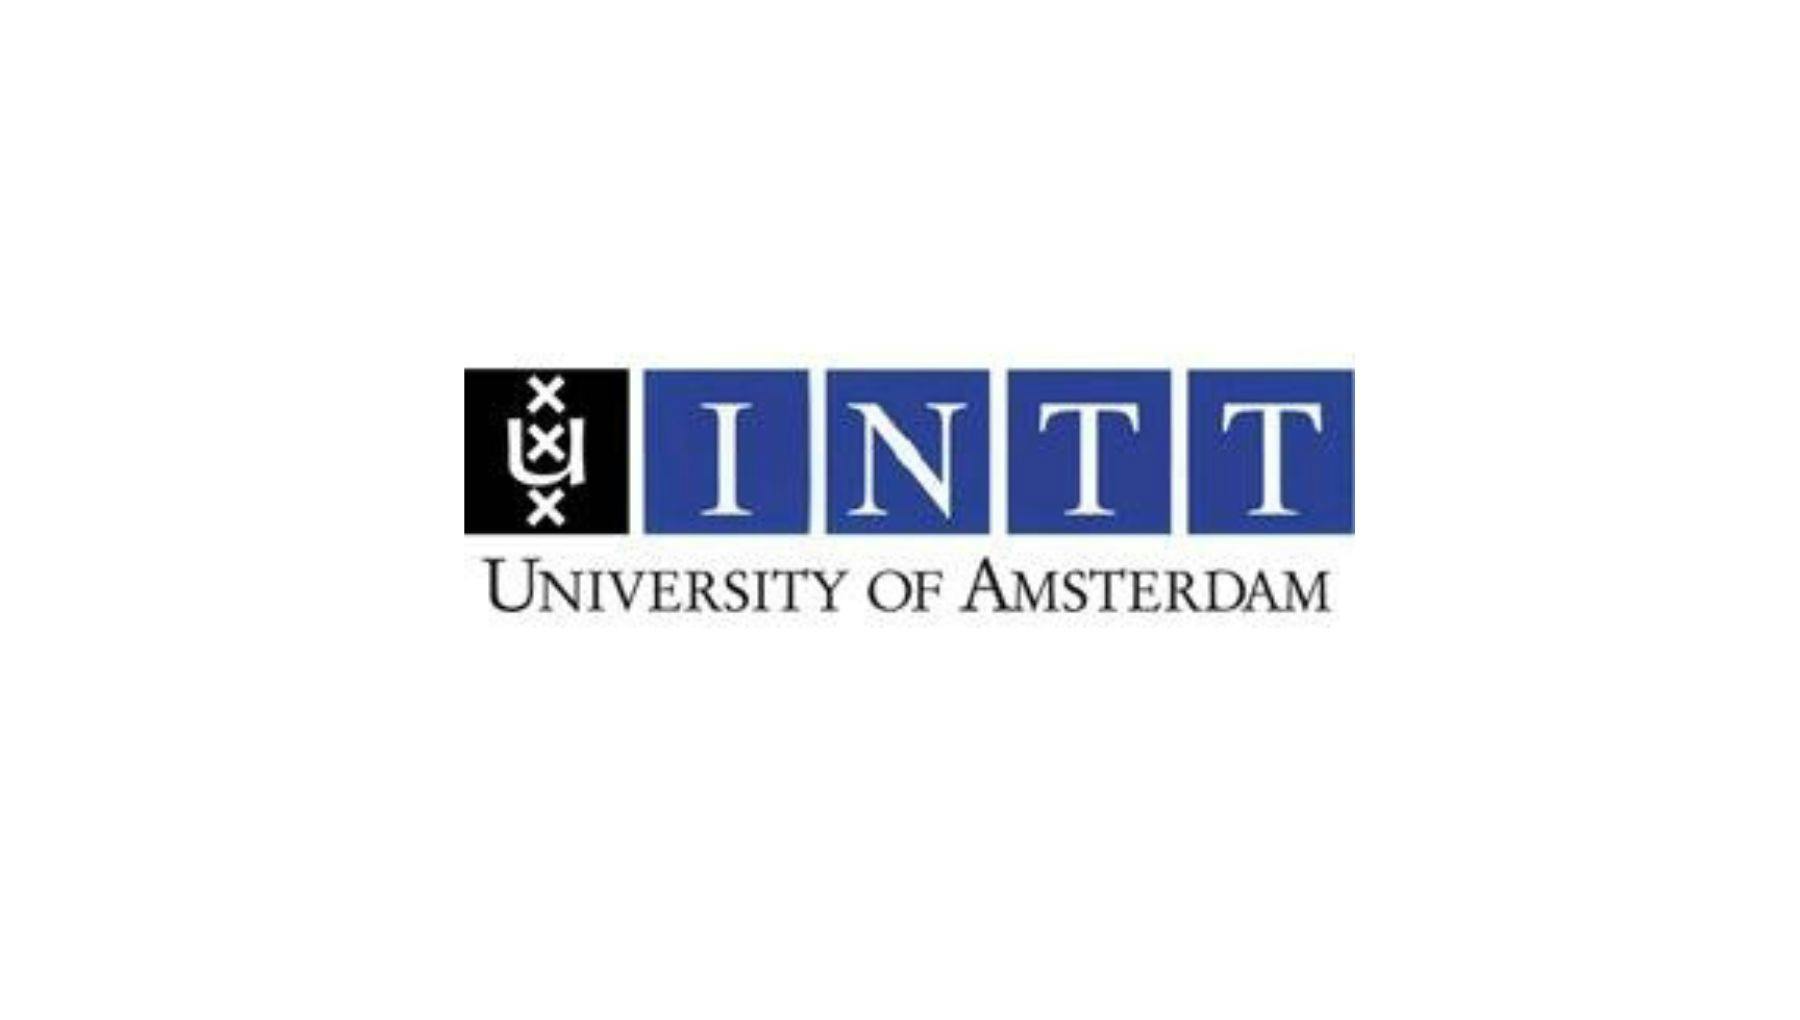 INTT �� Institute for Dutch Language Education at the University of Amsterdam